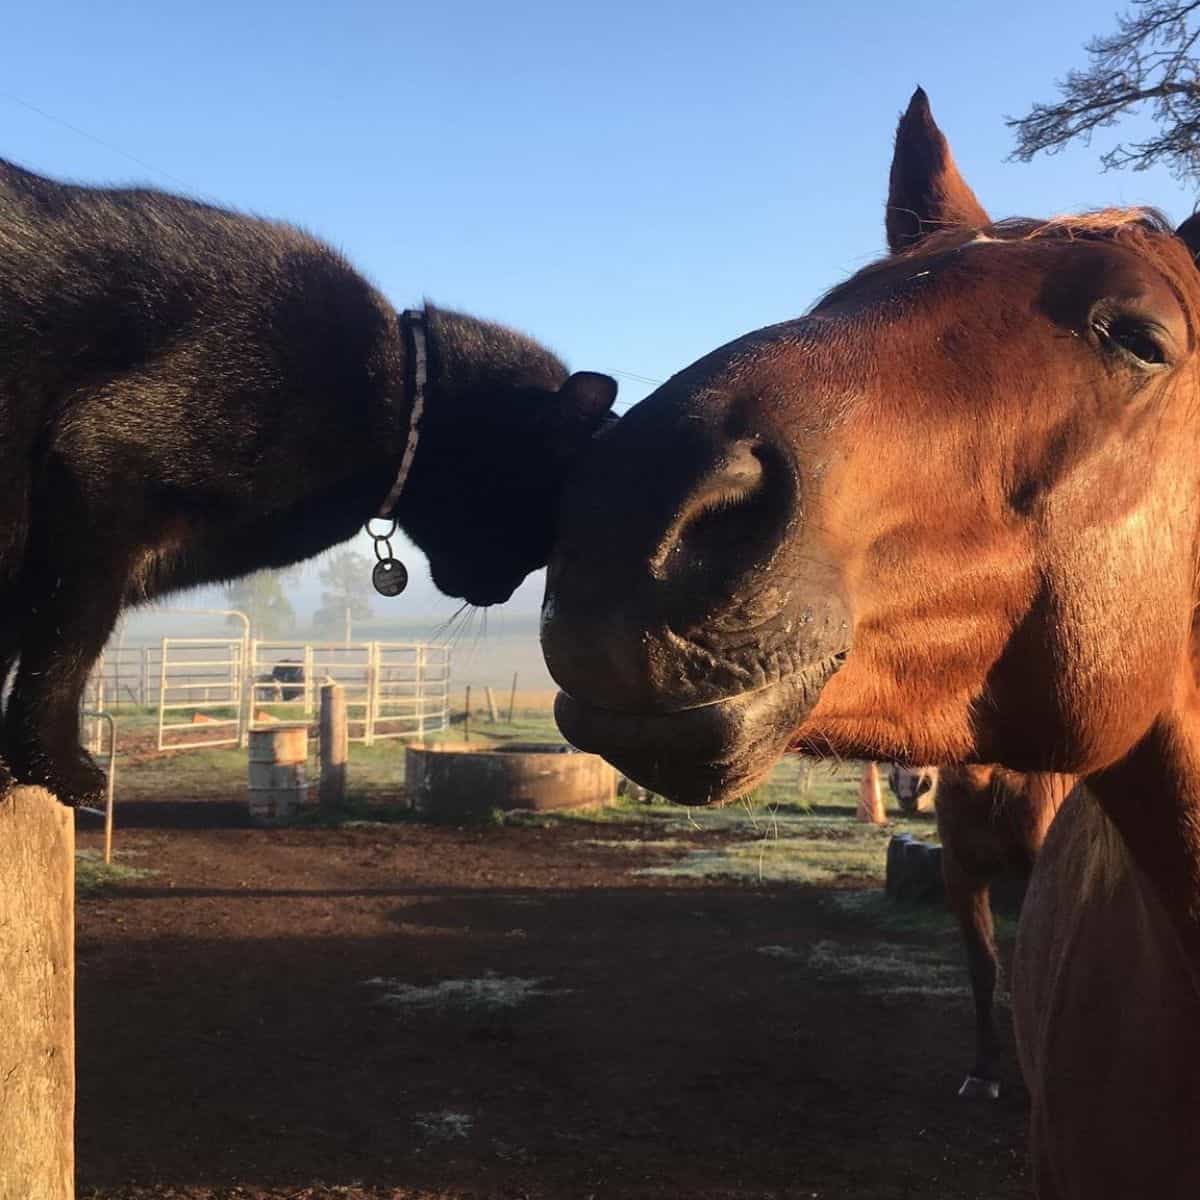 cat leaning its head on horse's mouth